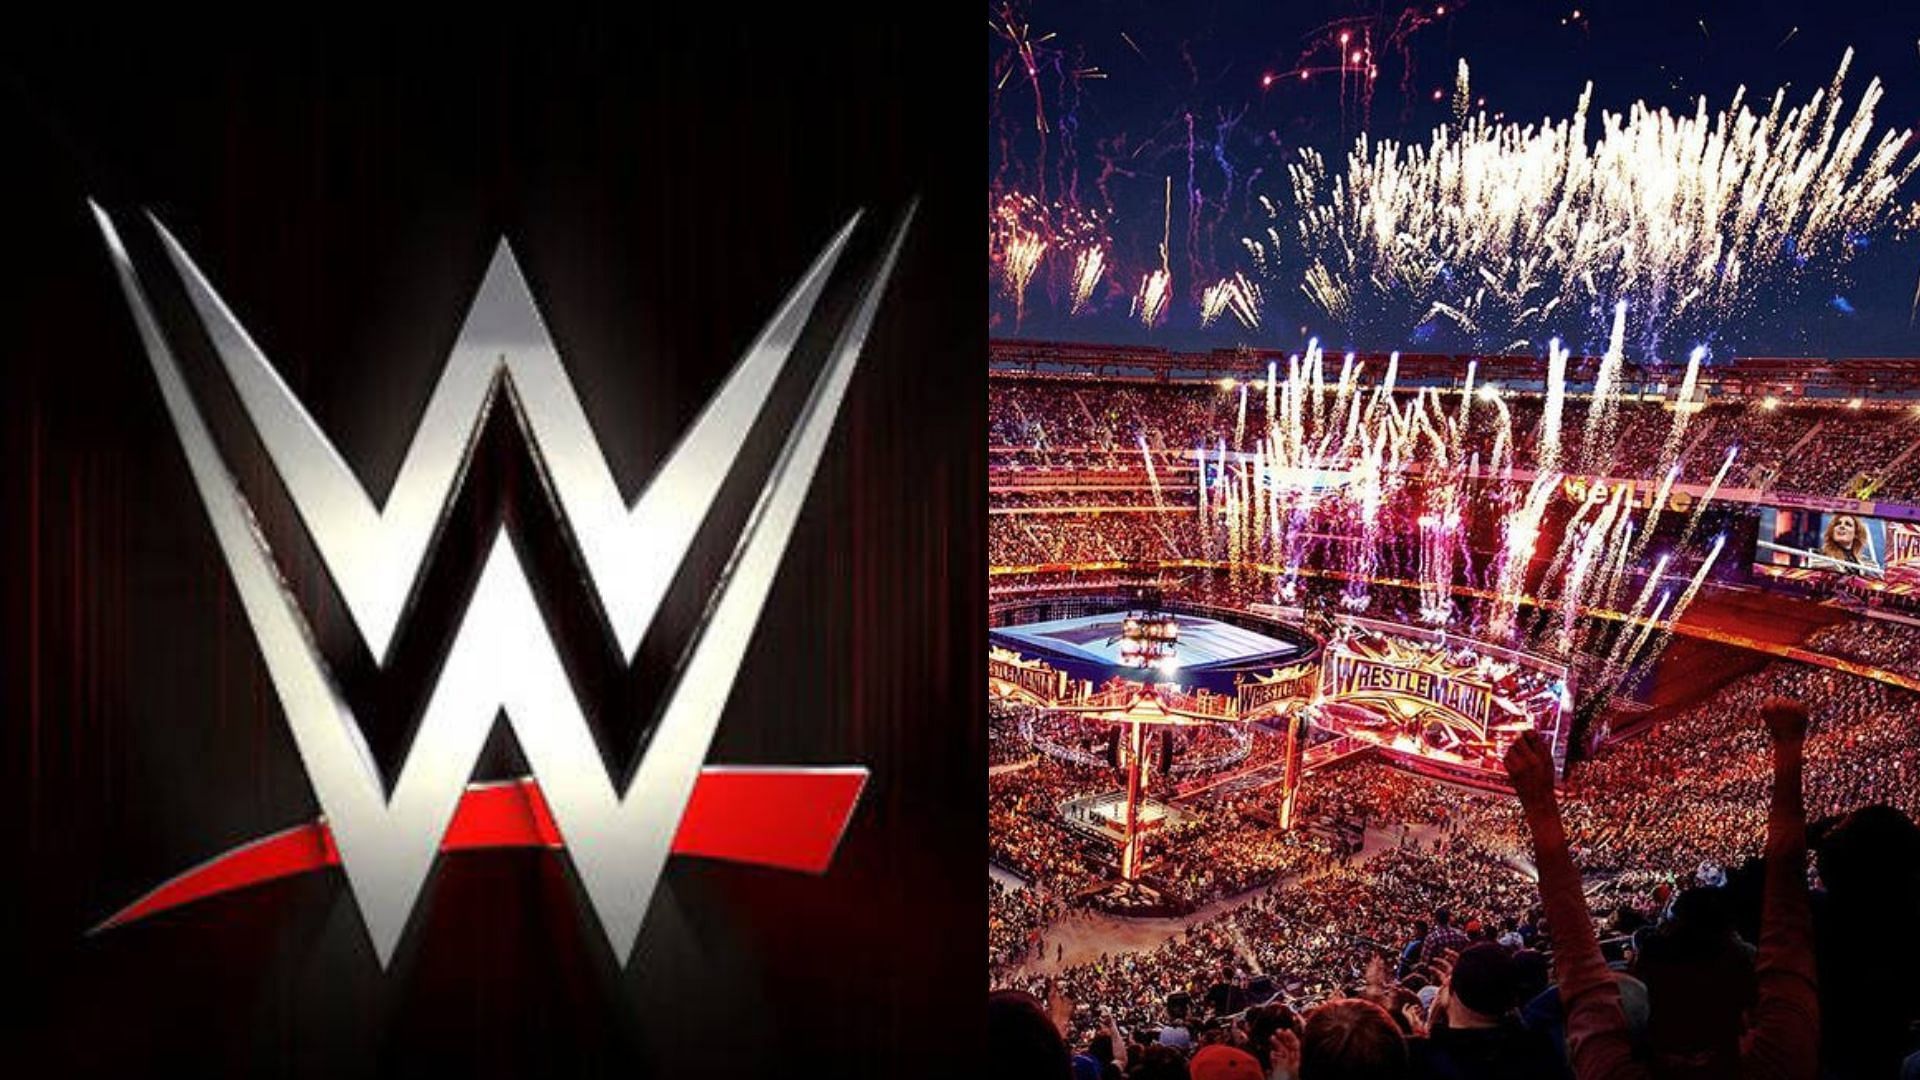 WrestleMania regularly generates the largest attendance for WWE